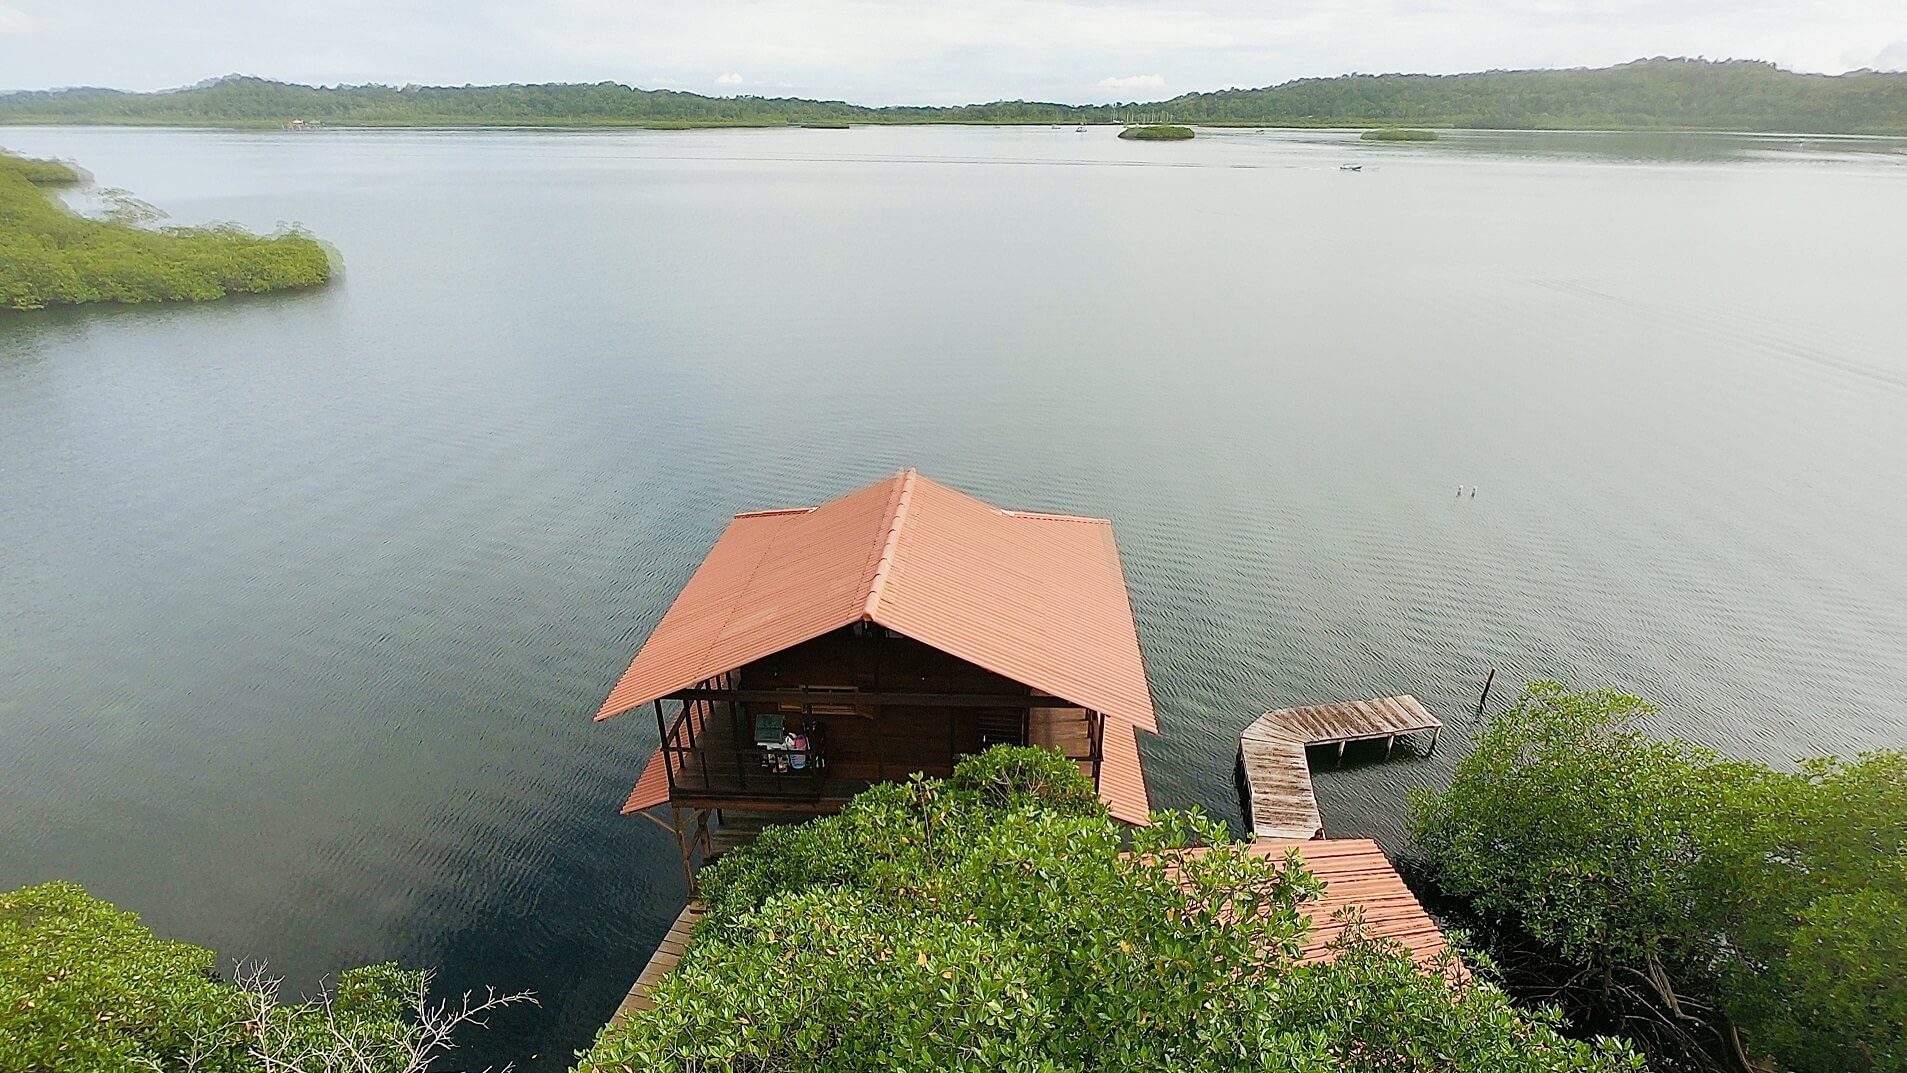 A boat house is sitting on the water.